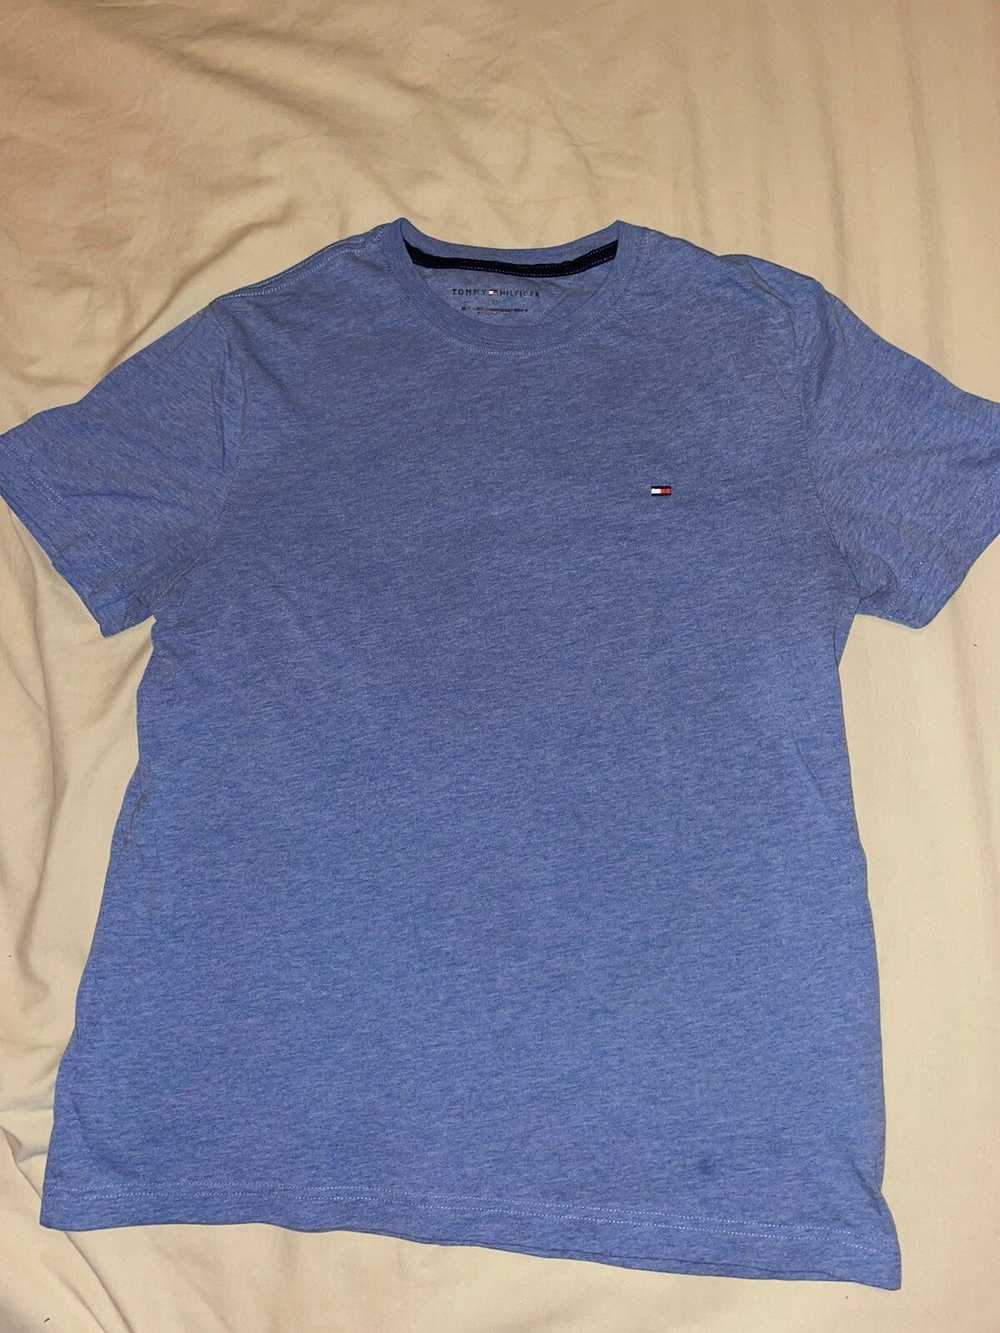 Tommy Hilfiger Tommy Hilfiger Tee Sz M Embroidered - image 1